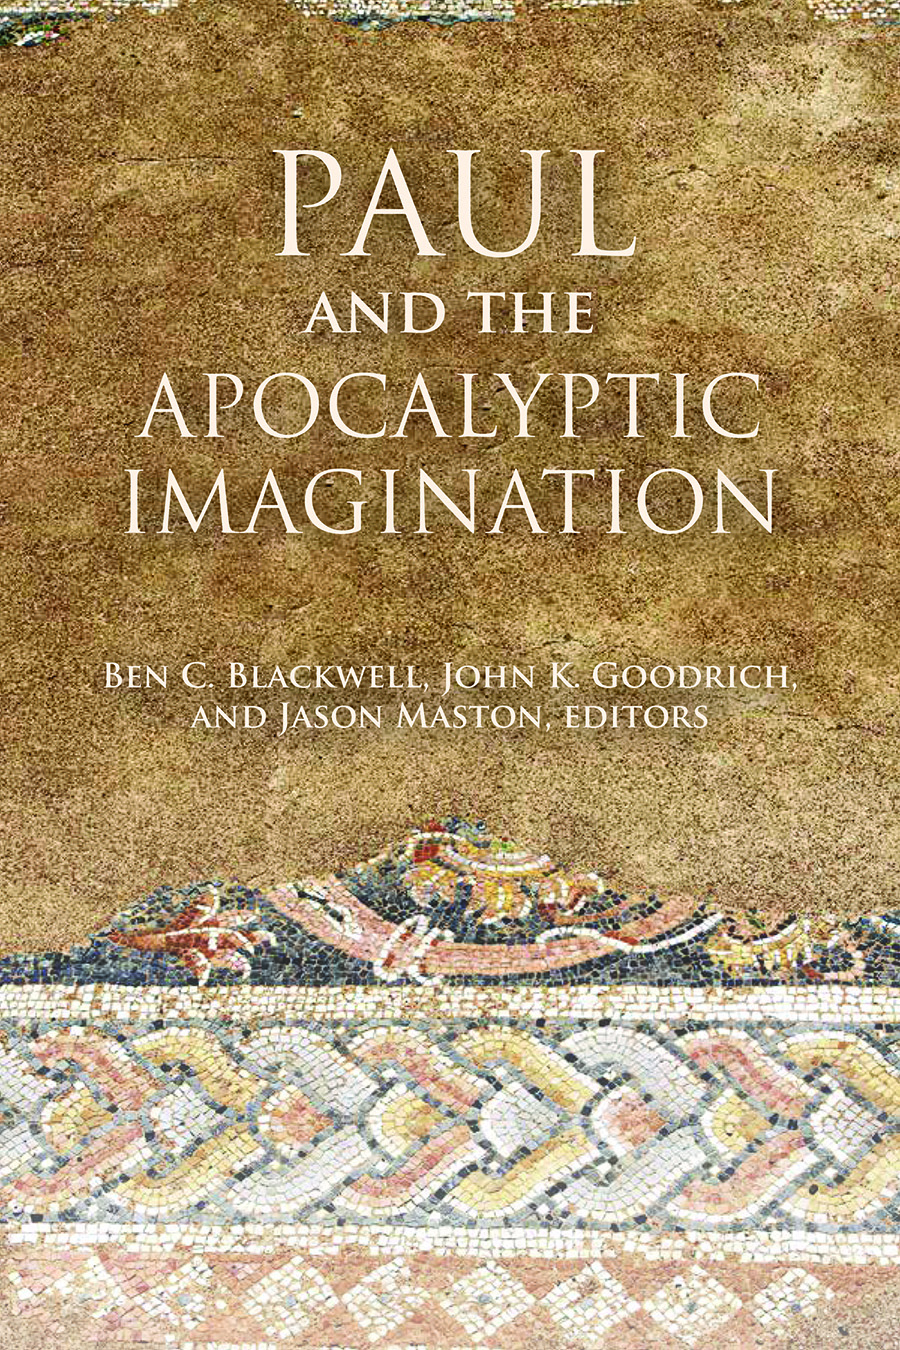 Some Reflections on Apocalyptic Thought and Time in Literature from the Second Temple Period